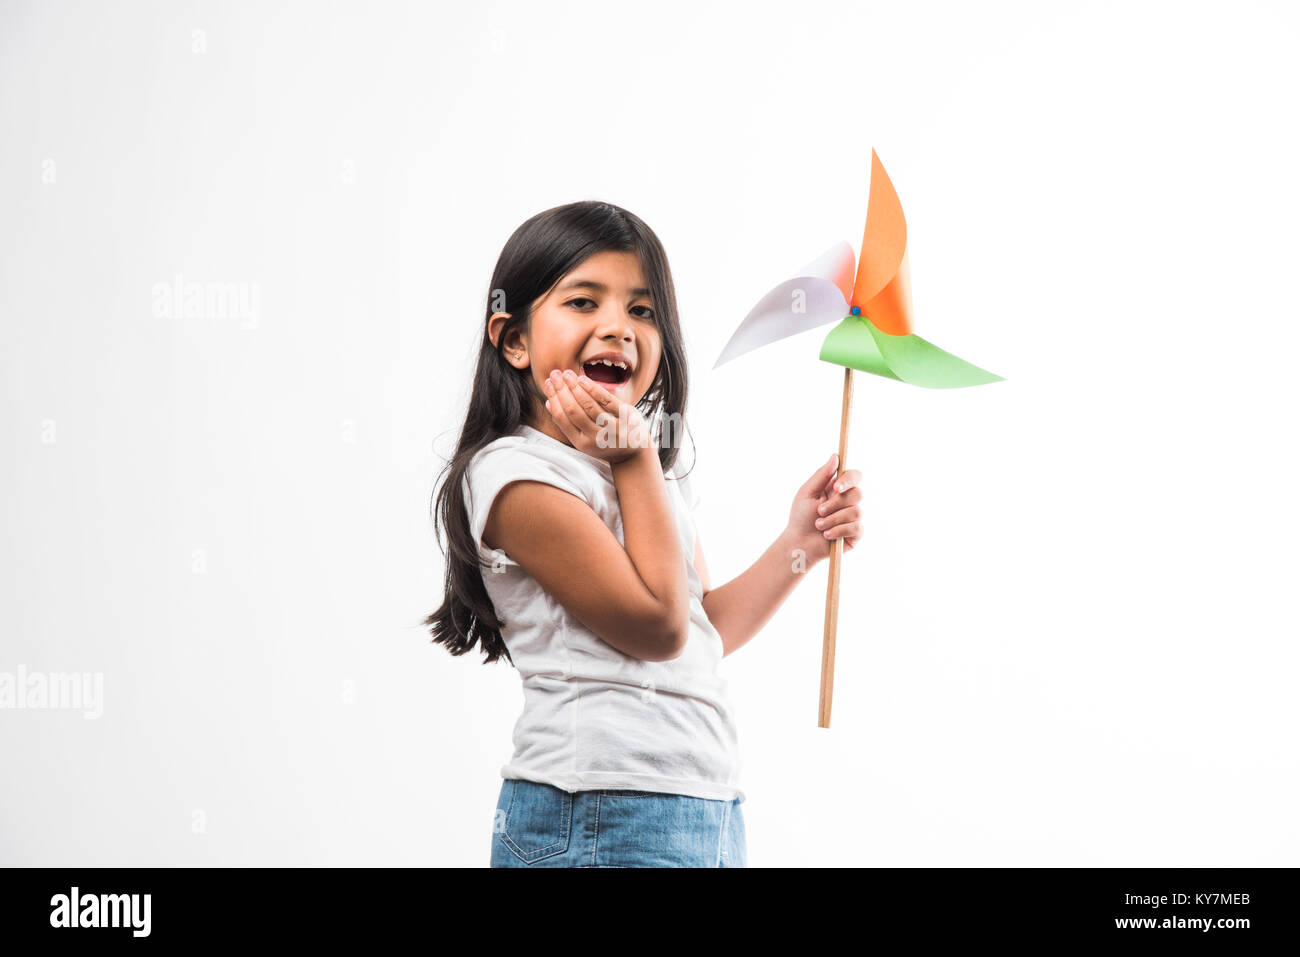 indian girl with paper windmill toy made up of tricolour or indian flag colours. Saluting, looking at camera or with red heart toy, celebrating 26 Jan Stock Photo